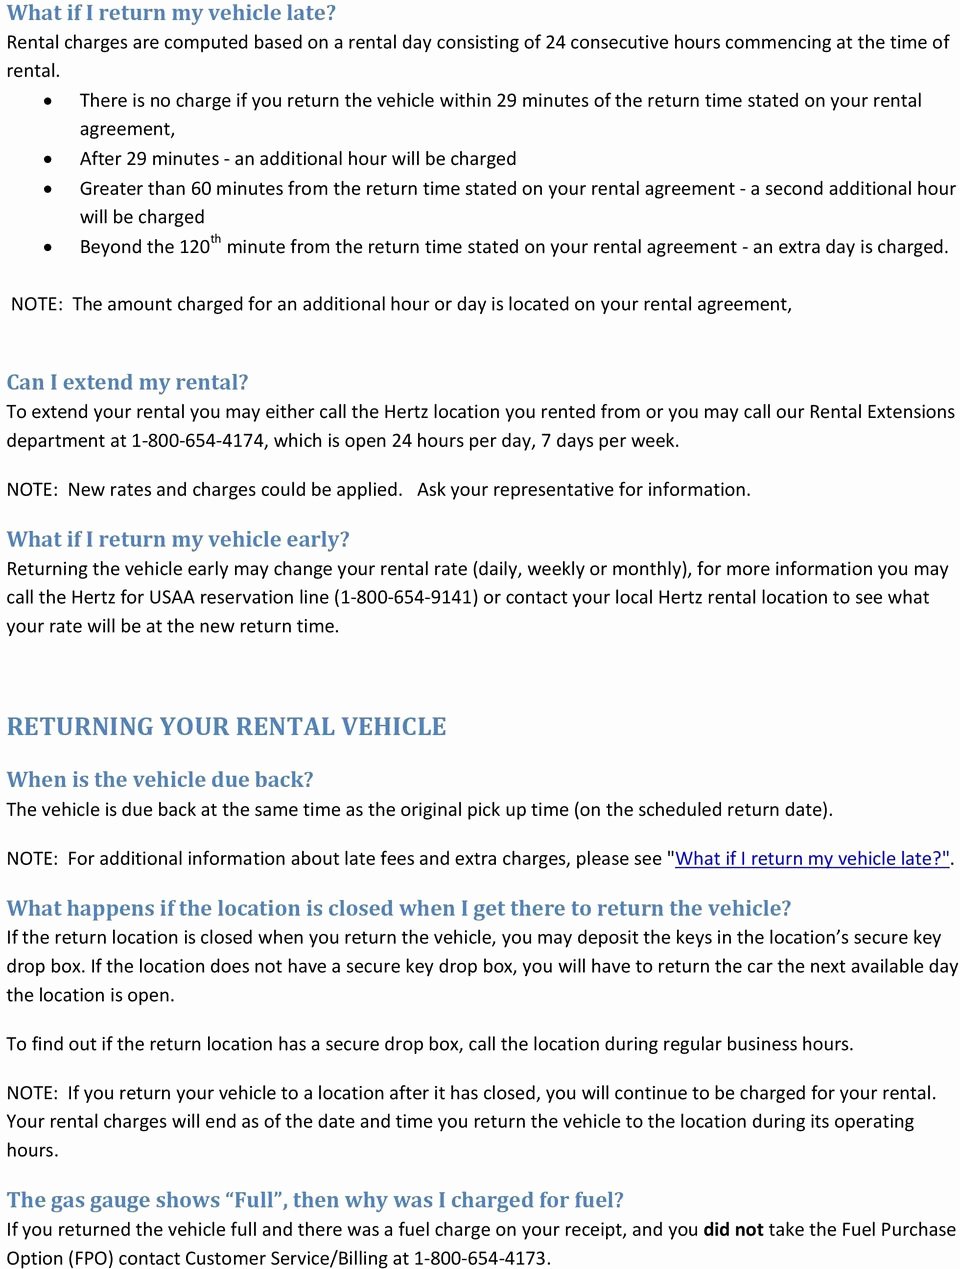 Beat Lease Contract Template Awesome Hertz Rental Car Agreement